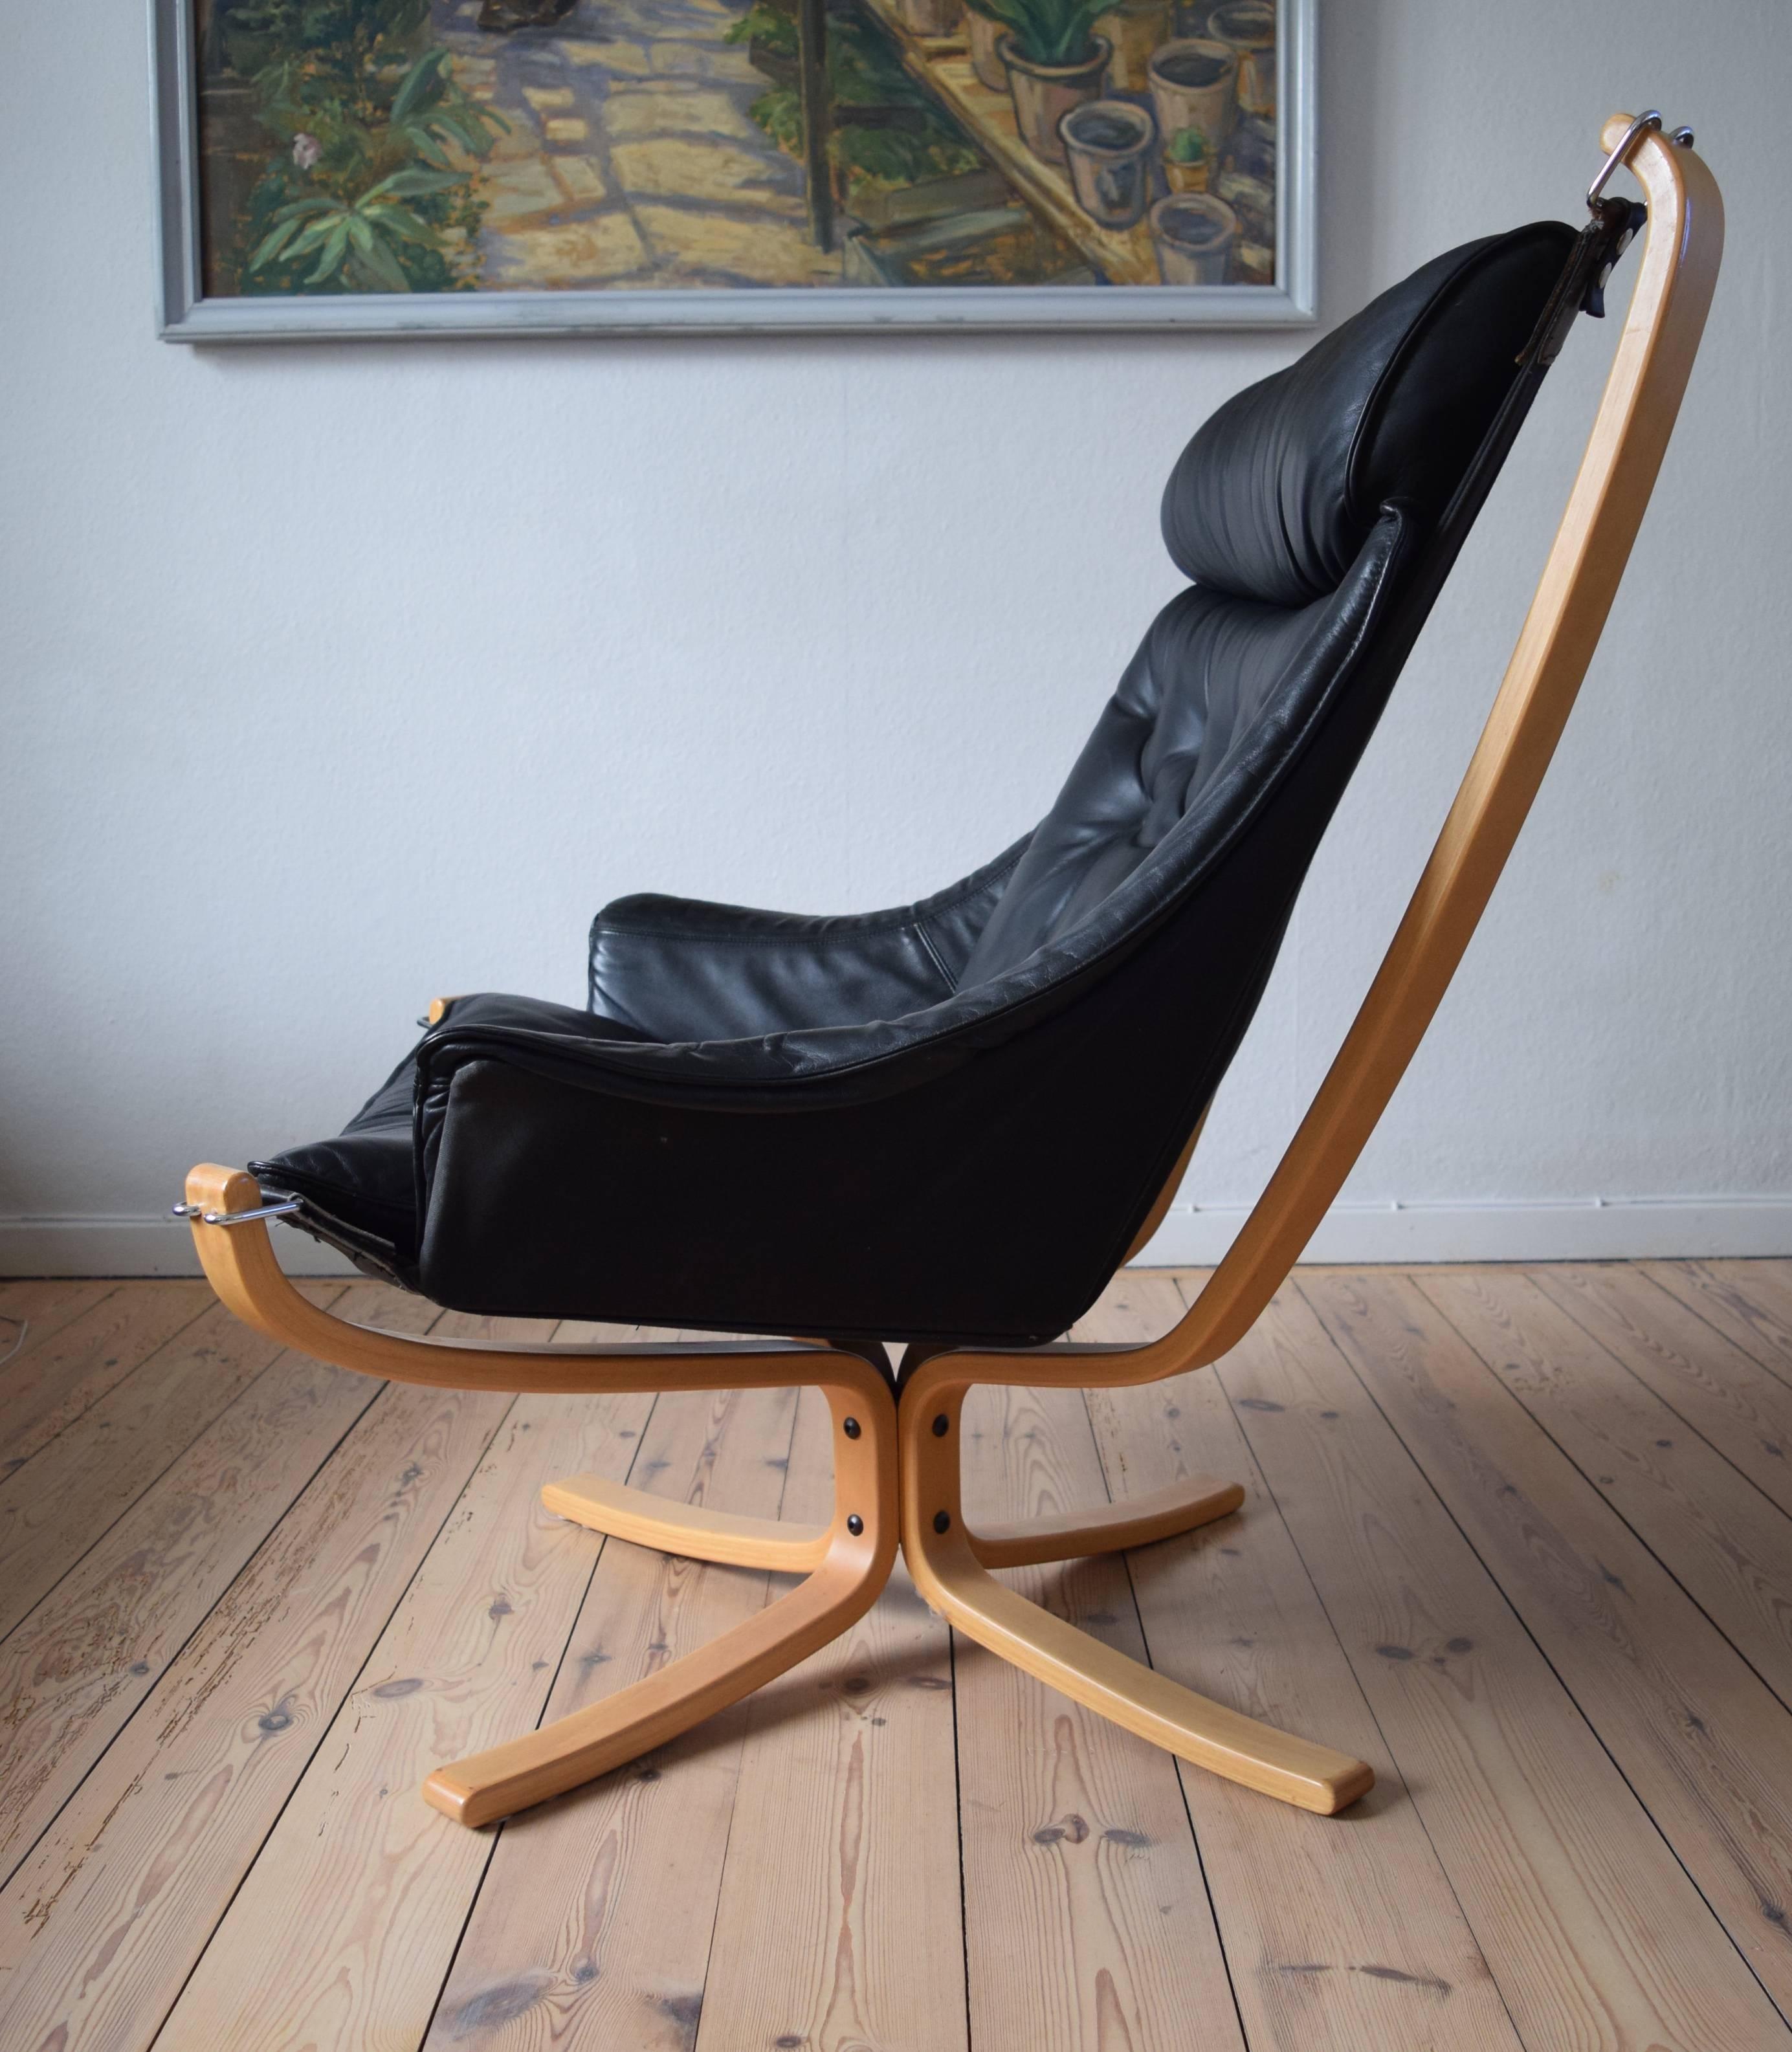 Winged black falcon chair by Sigurd Ressell for Vatne Møbler made from bent birchwood and manufactured in Norway in the 1970s. The chair is in a very good vintage condition with a very soft and supple leather seat cushion.